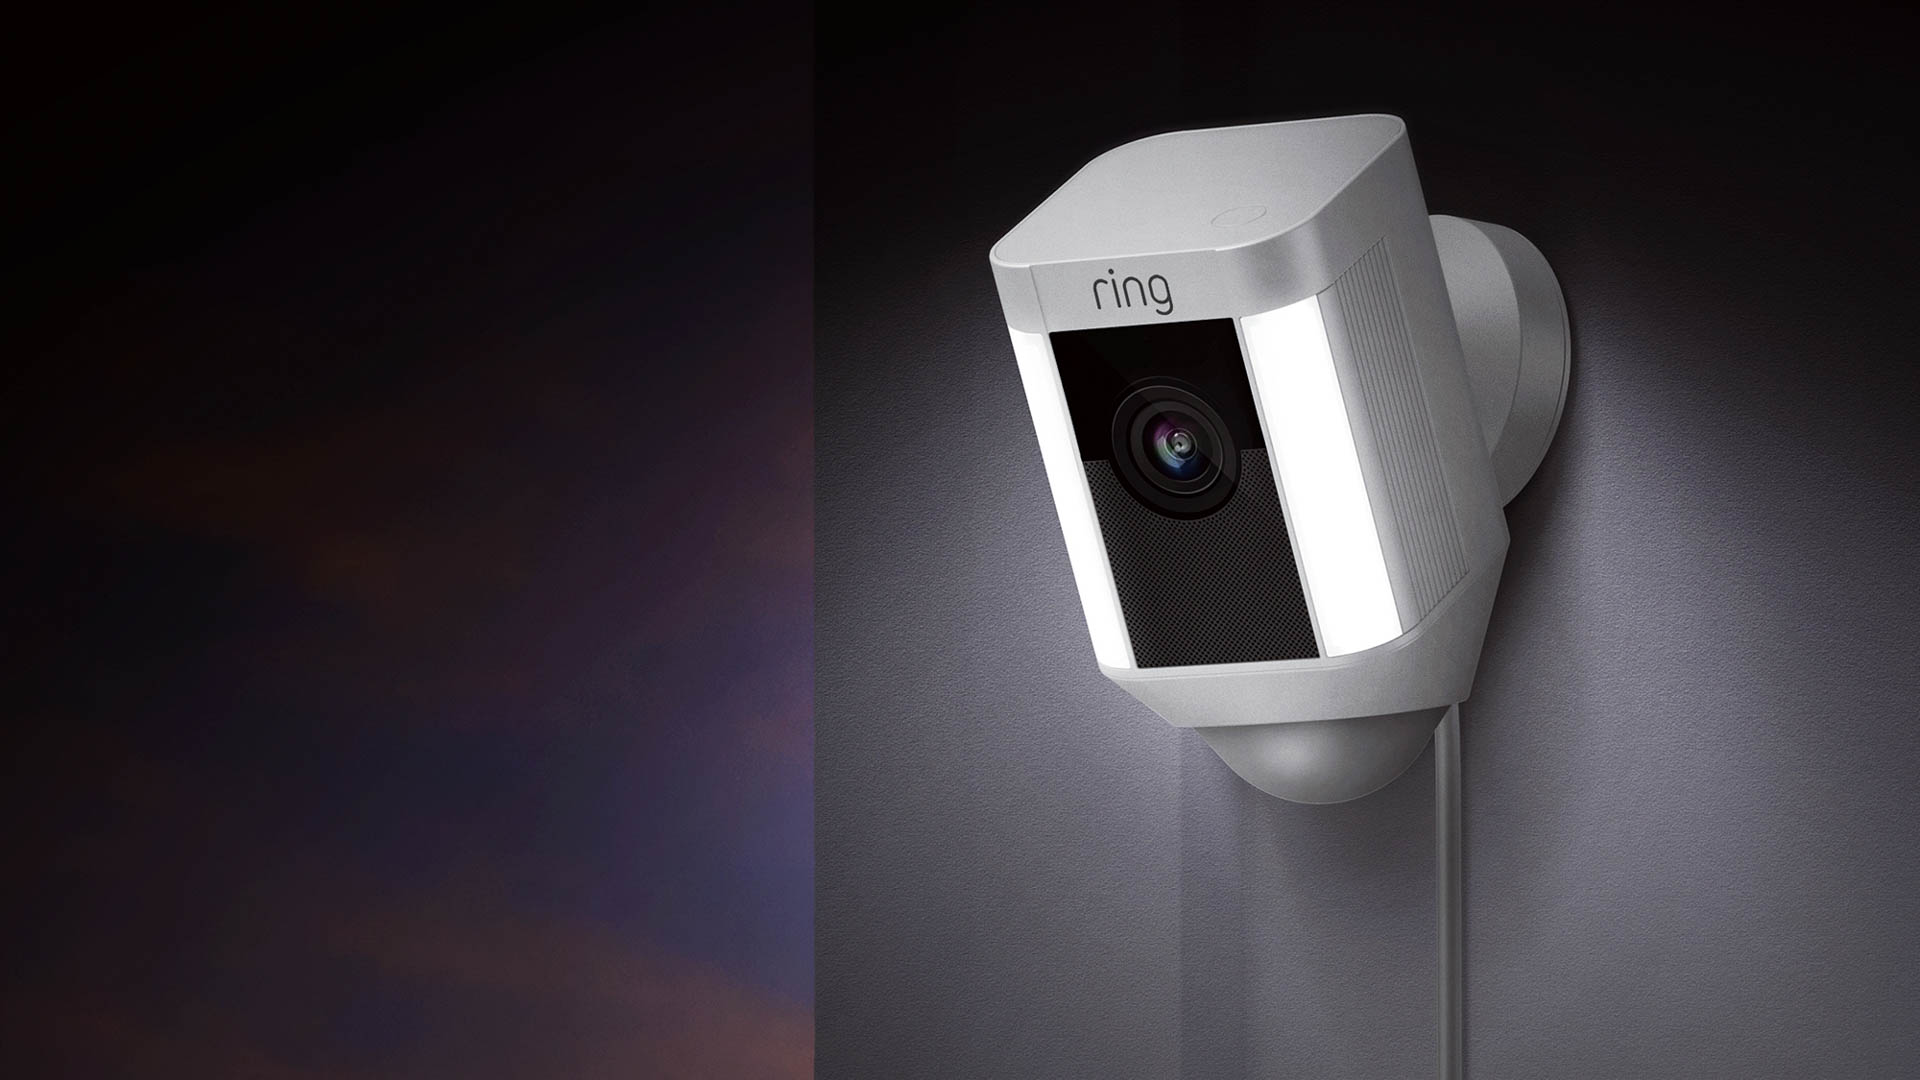 Do you need a paid cloud storage plan for your security camera? Maybe not, if you plan to use your camera mostly for viewing its live streaming feature. Image: Ring.